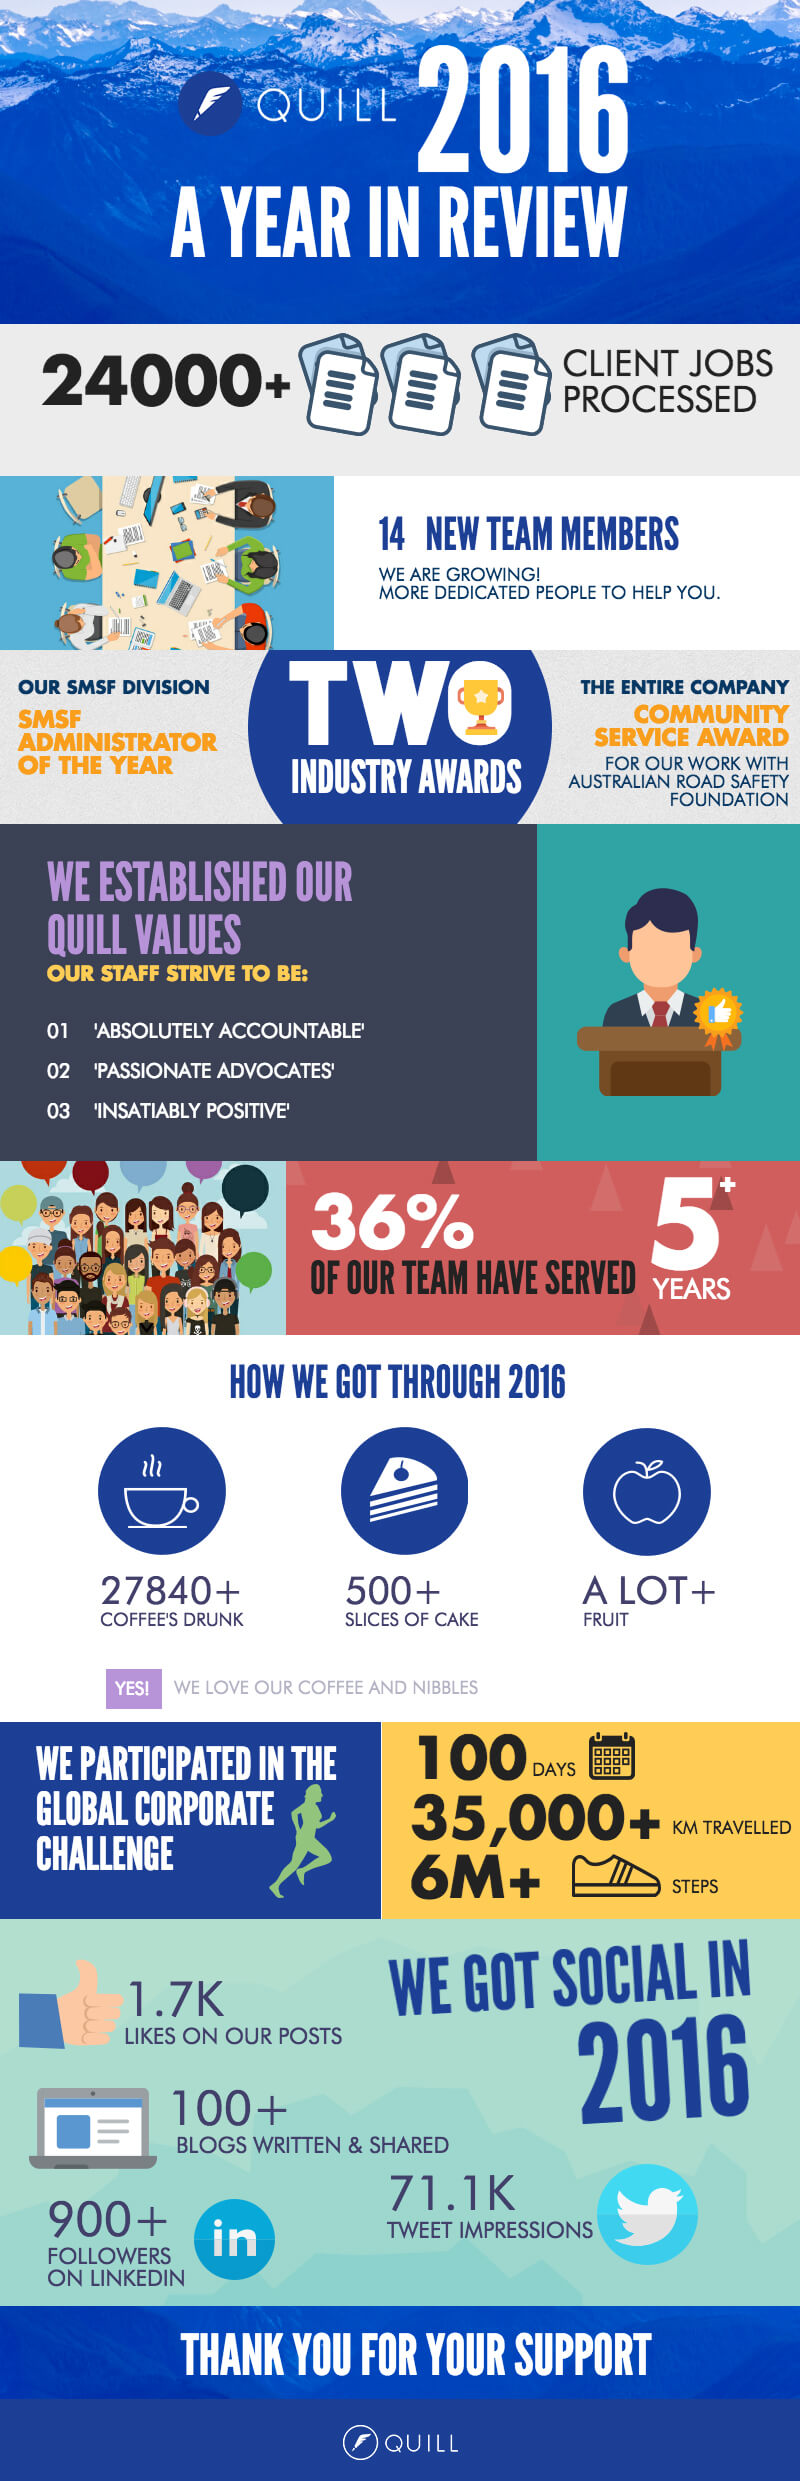 quill-group-2016-year-in-review